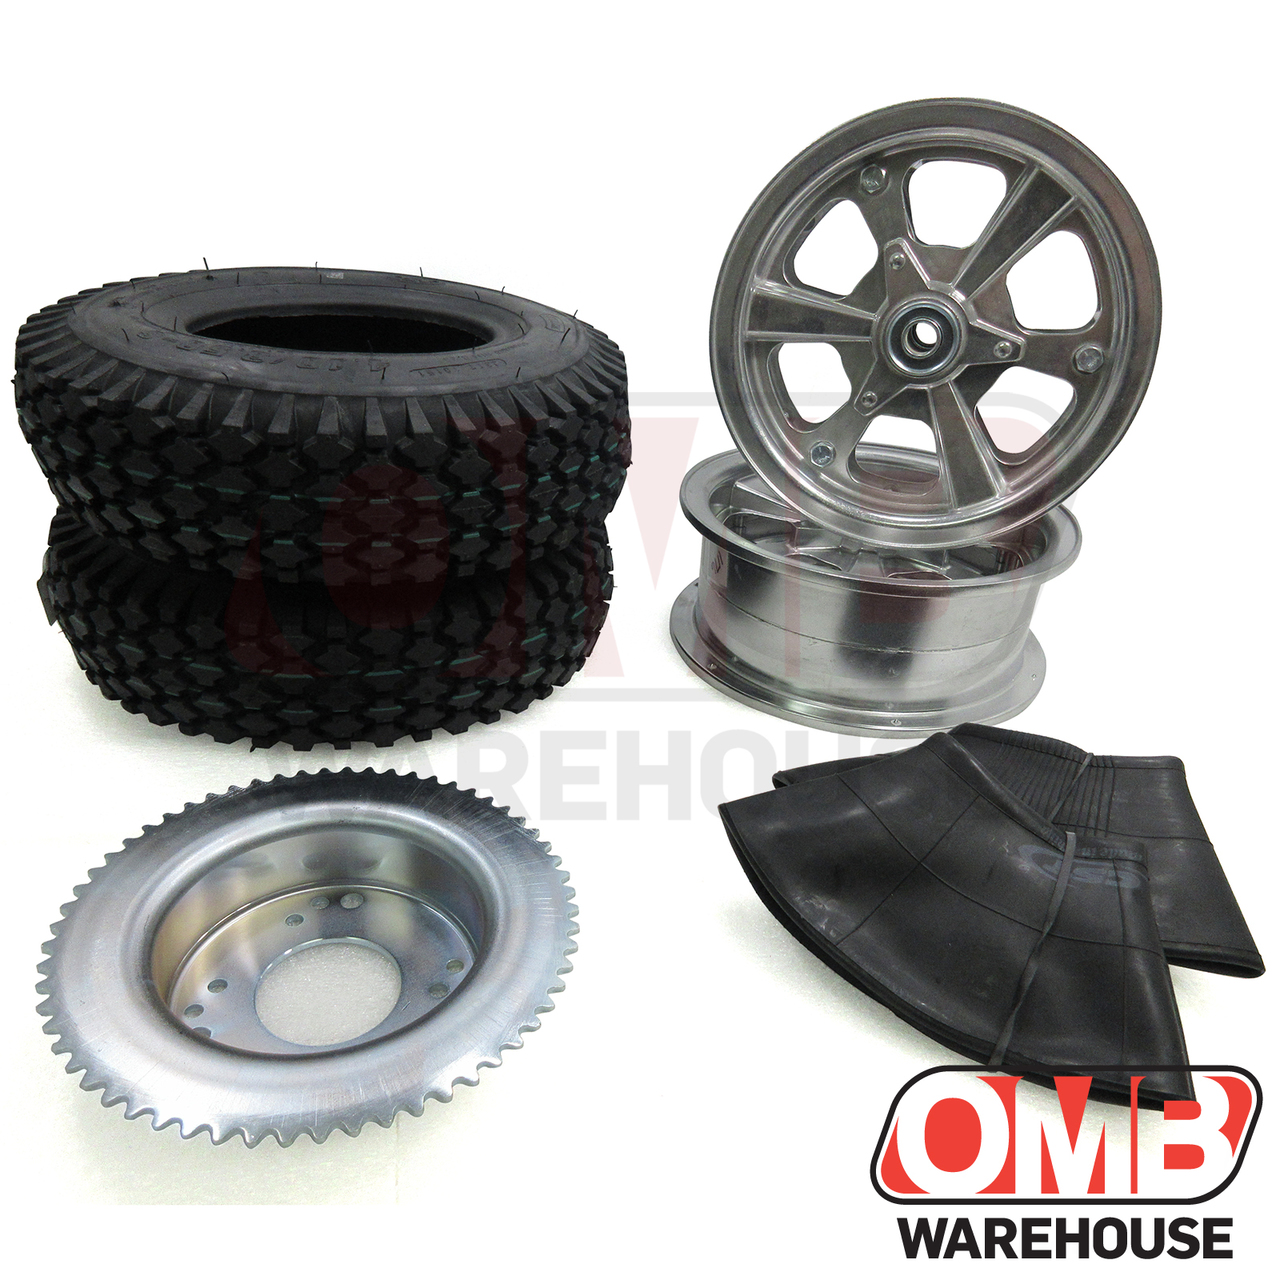 OMB Warehouse 8" Spinner Wheel Package - Studded Tire - 60 Tooth Sprocket